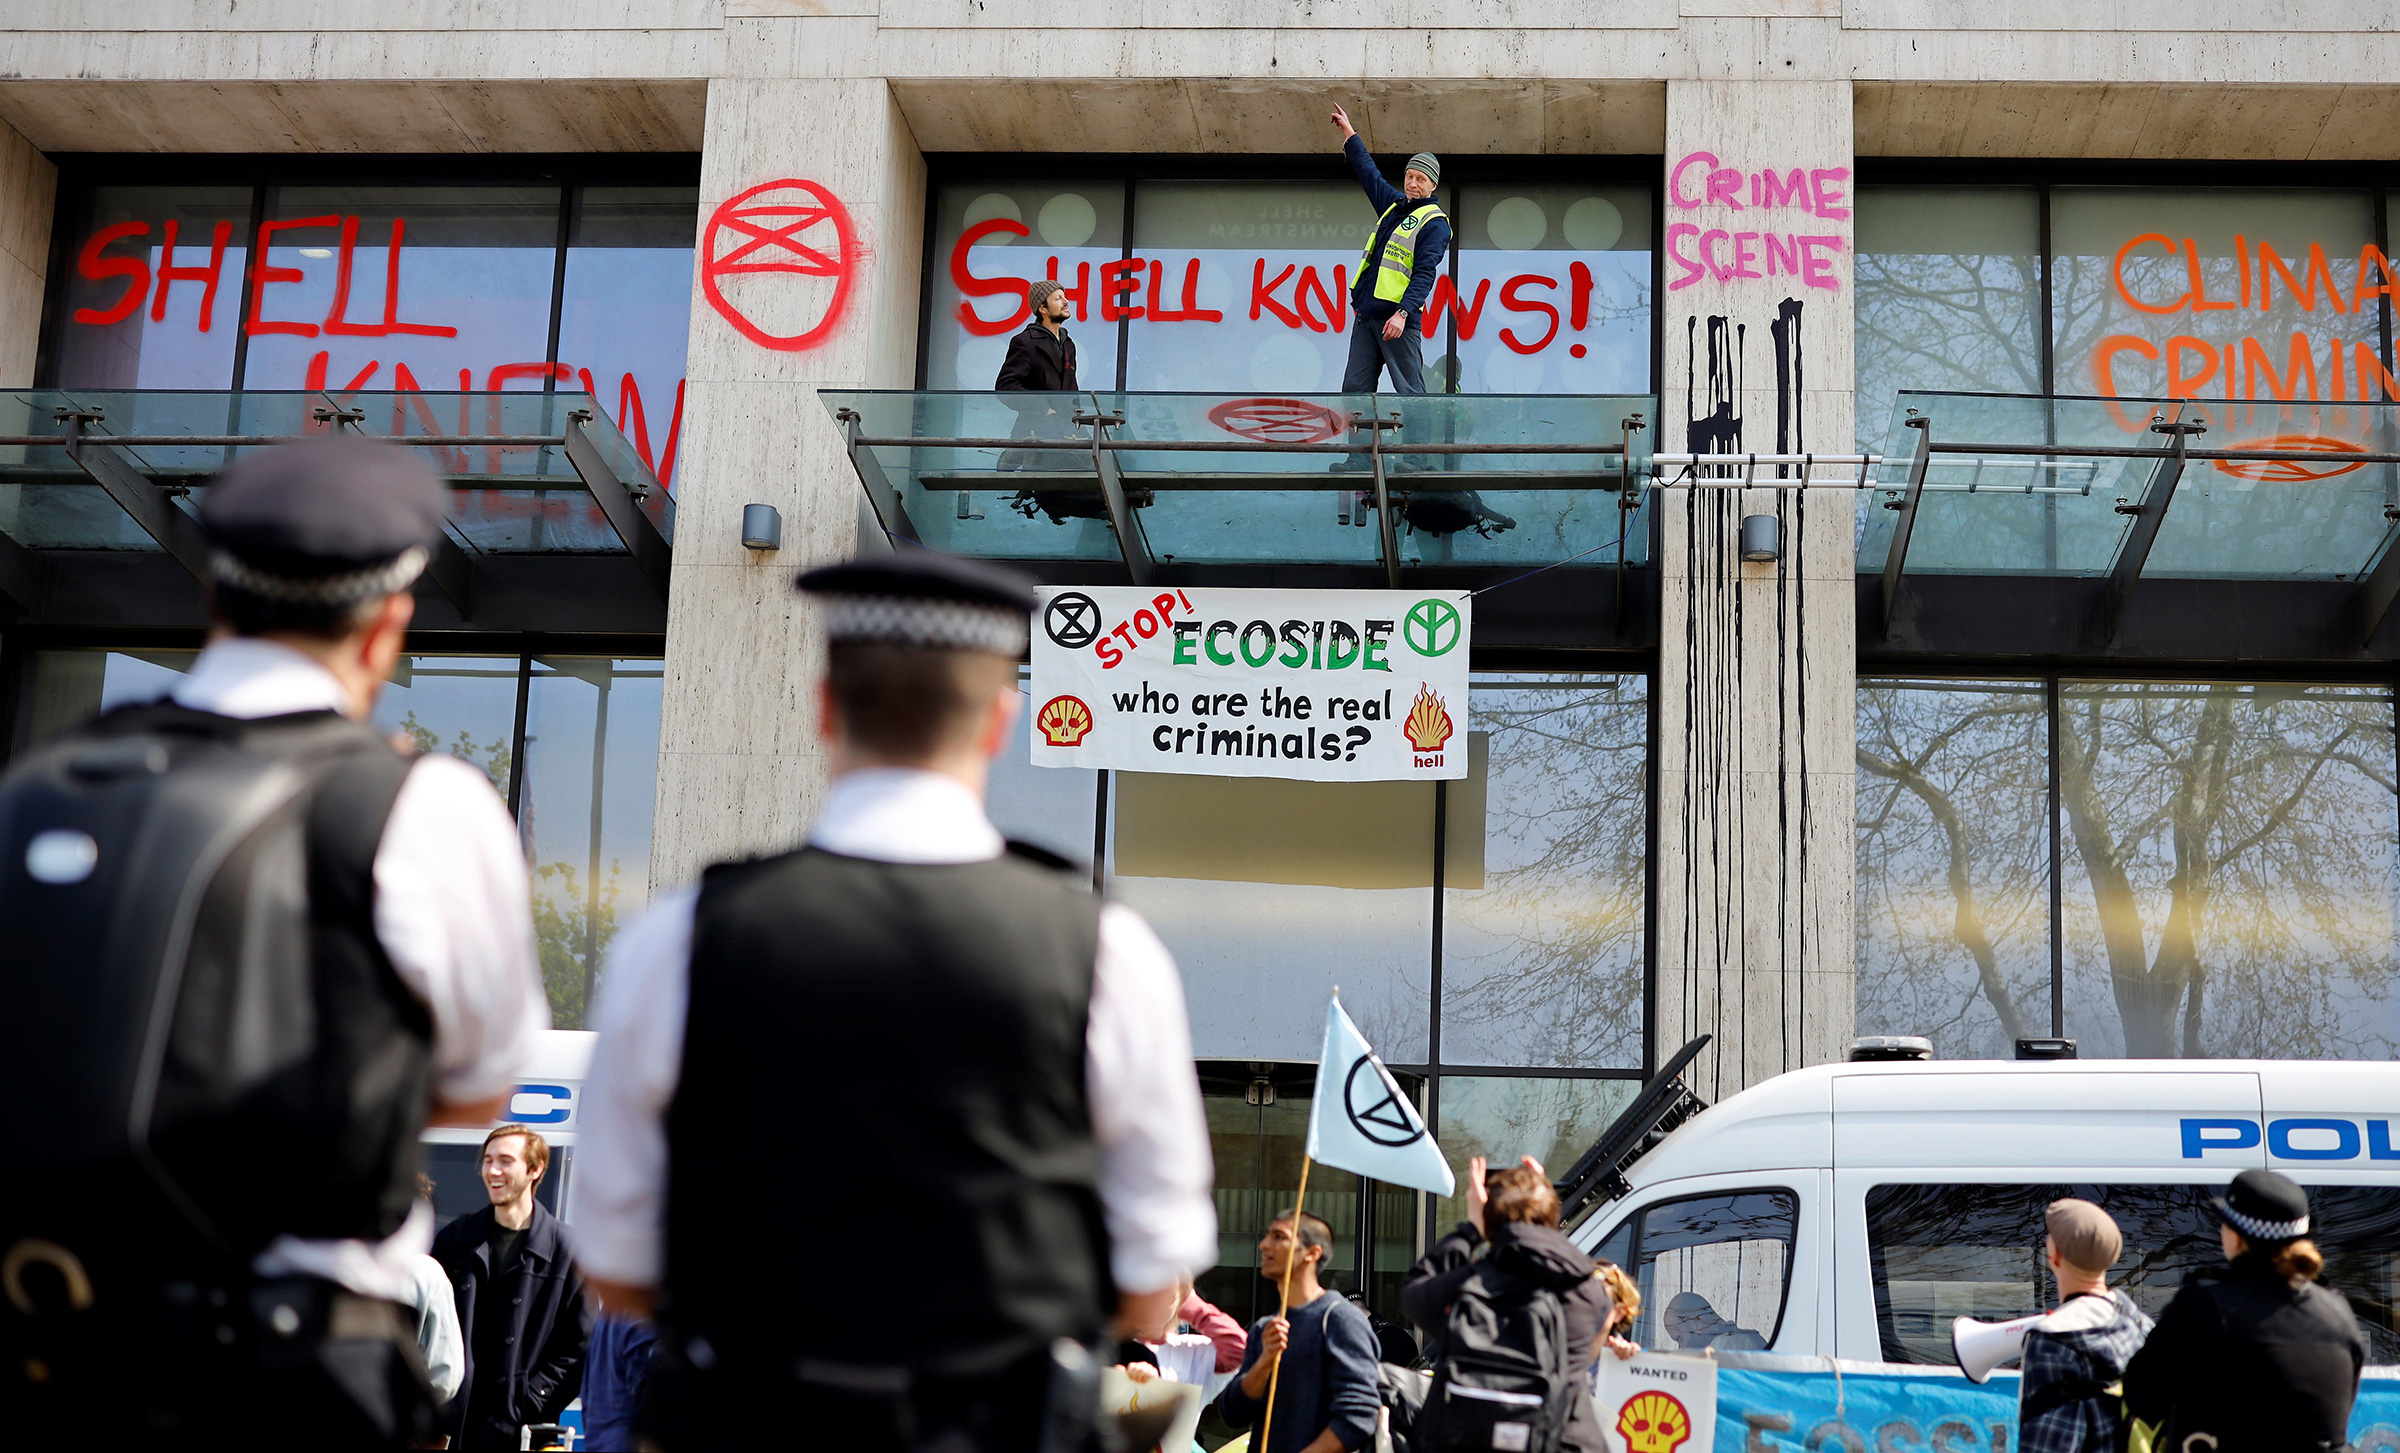 Extinction Rebellion protests outside Shell’s London office in April 2019